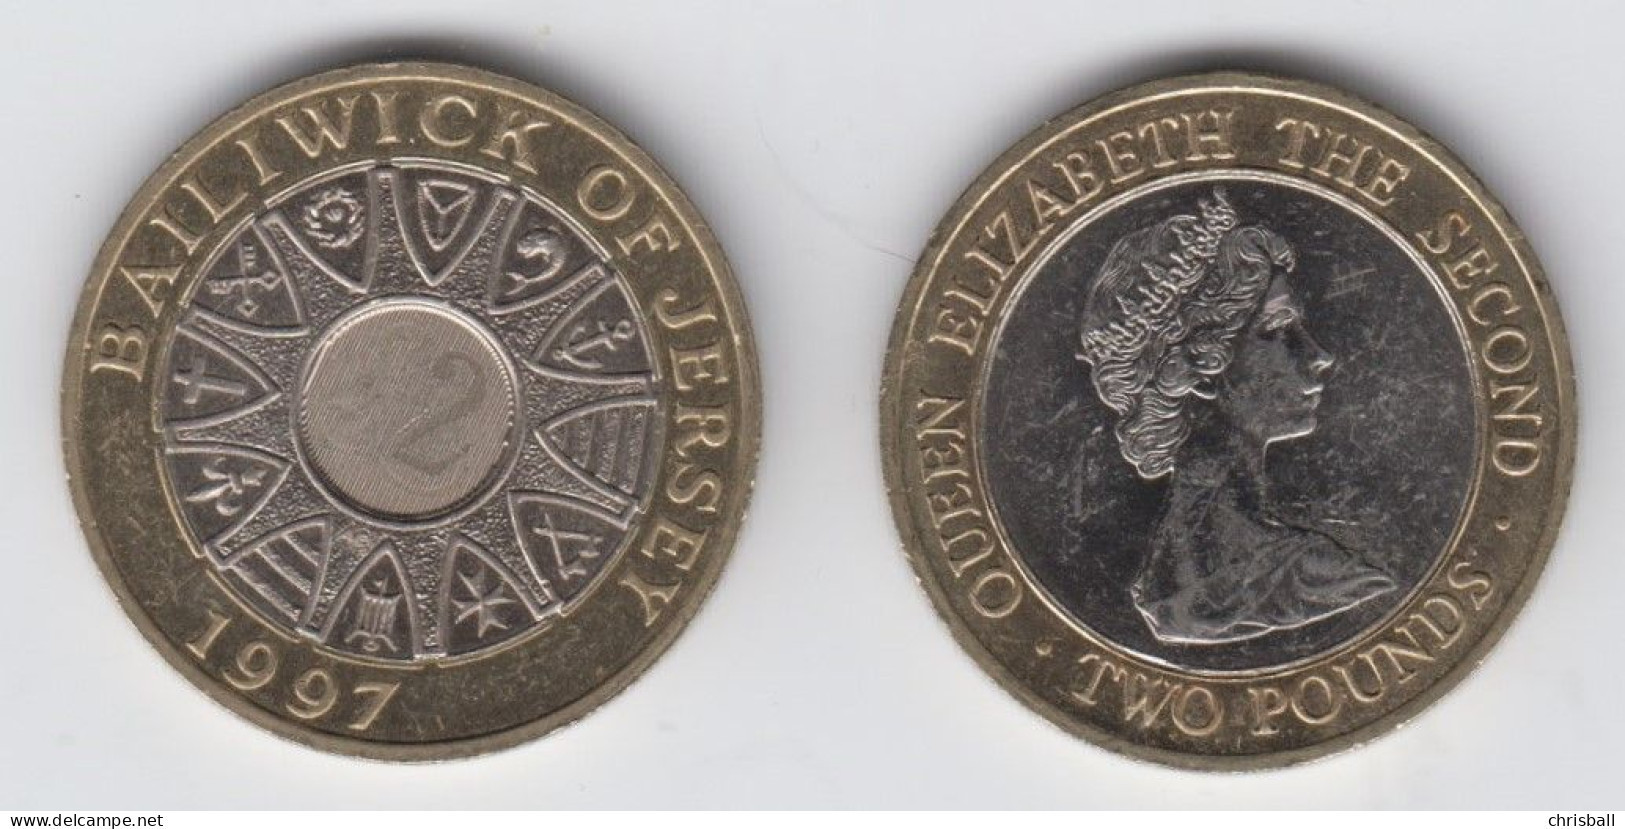 Jersey Two Pound Coin £2 Circulated Dated 1997 - Jersey